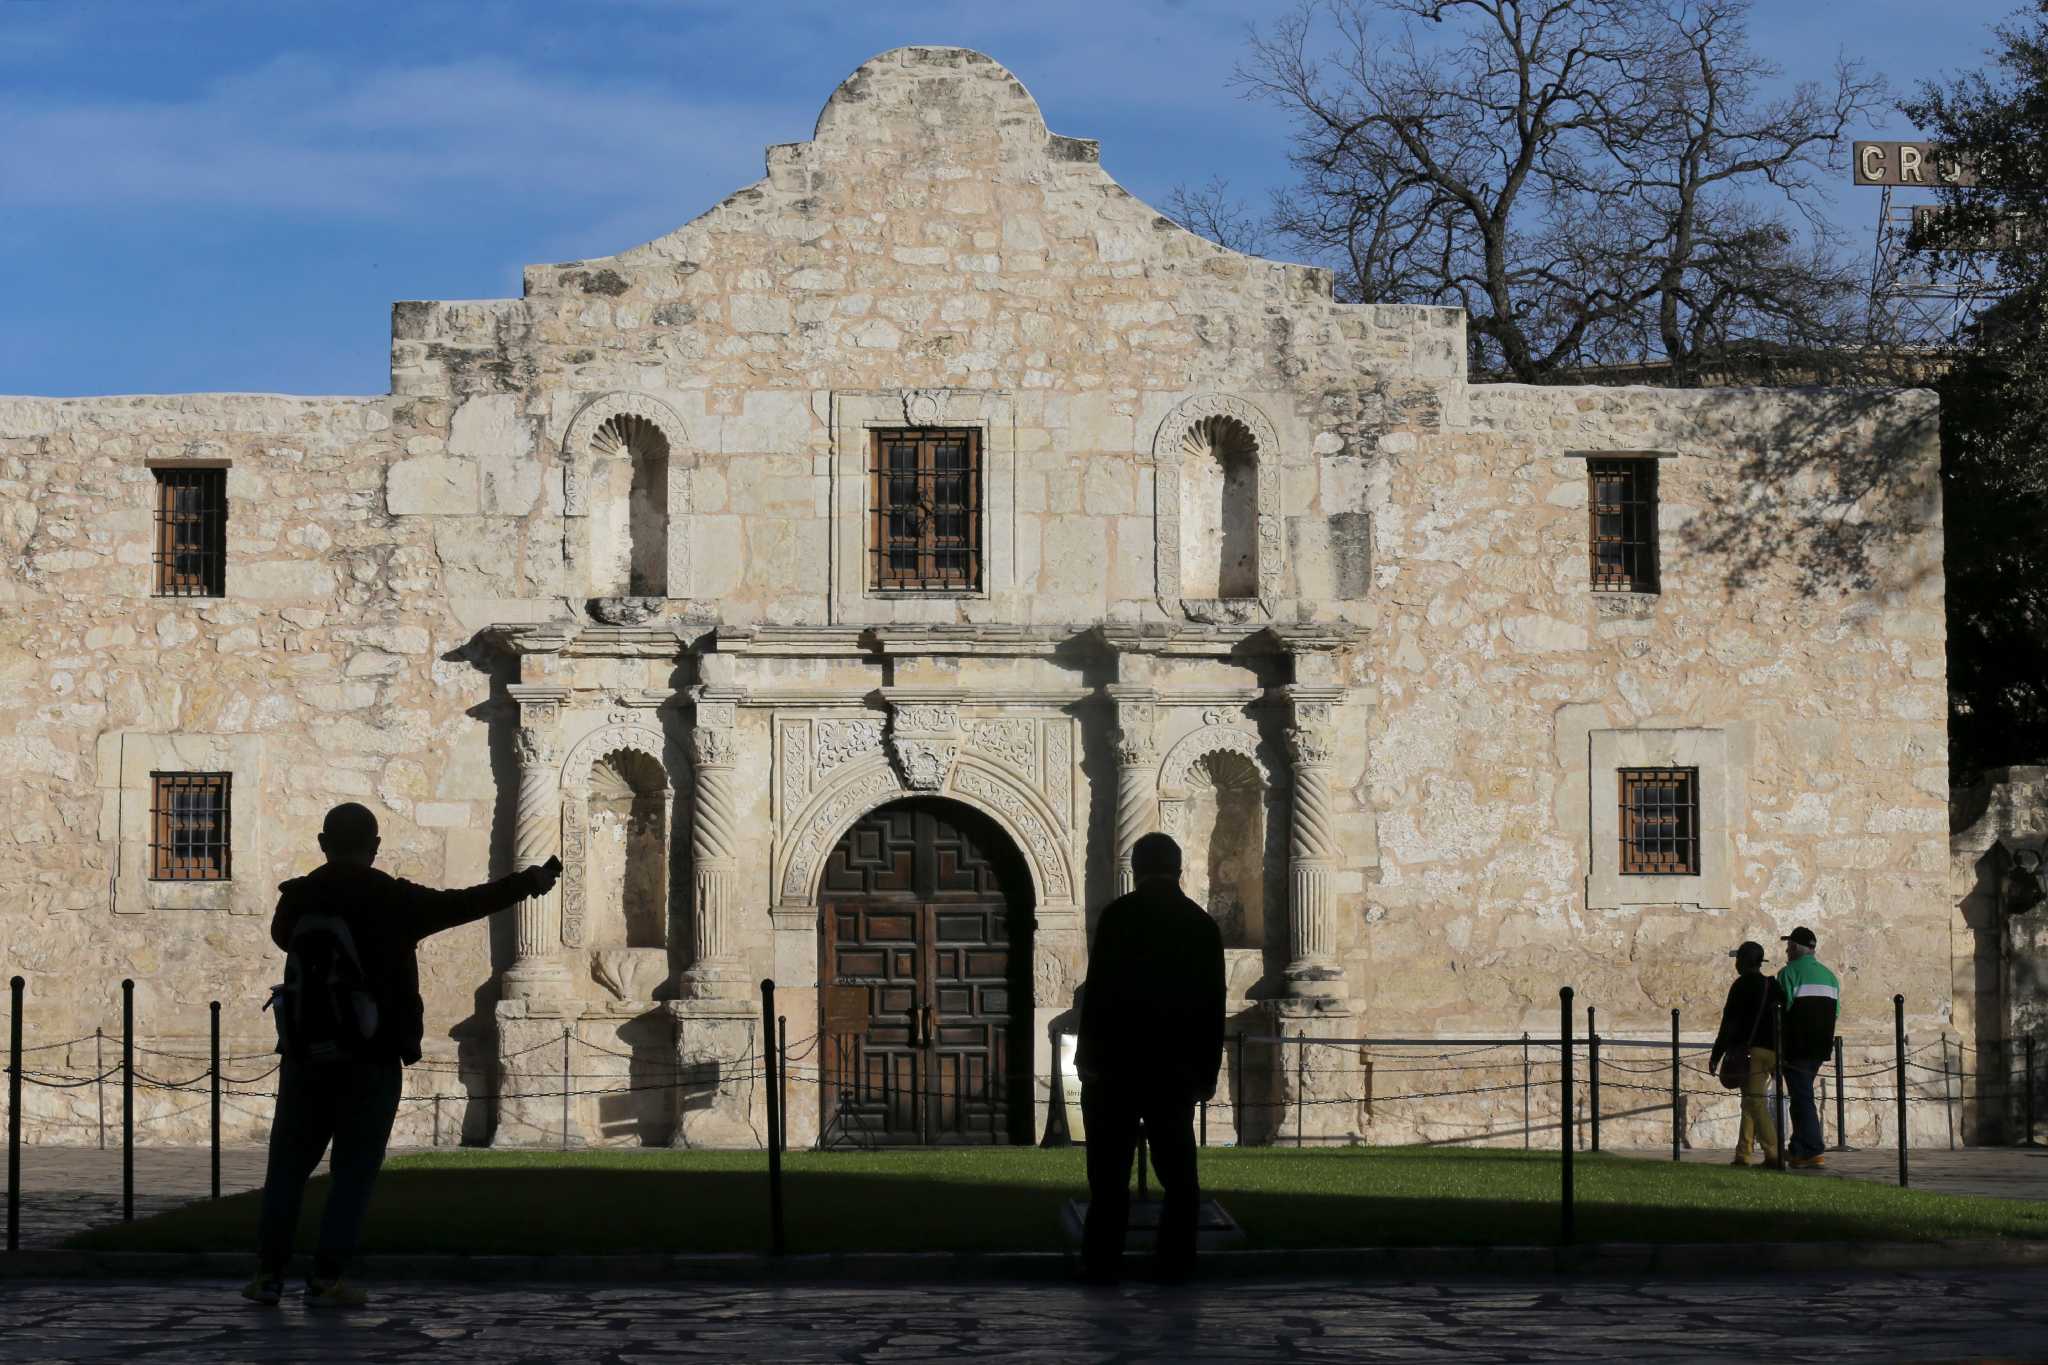 10 things that will change at the Alamo in 2016 - San Antonio Express-News2048 x 1365